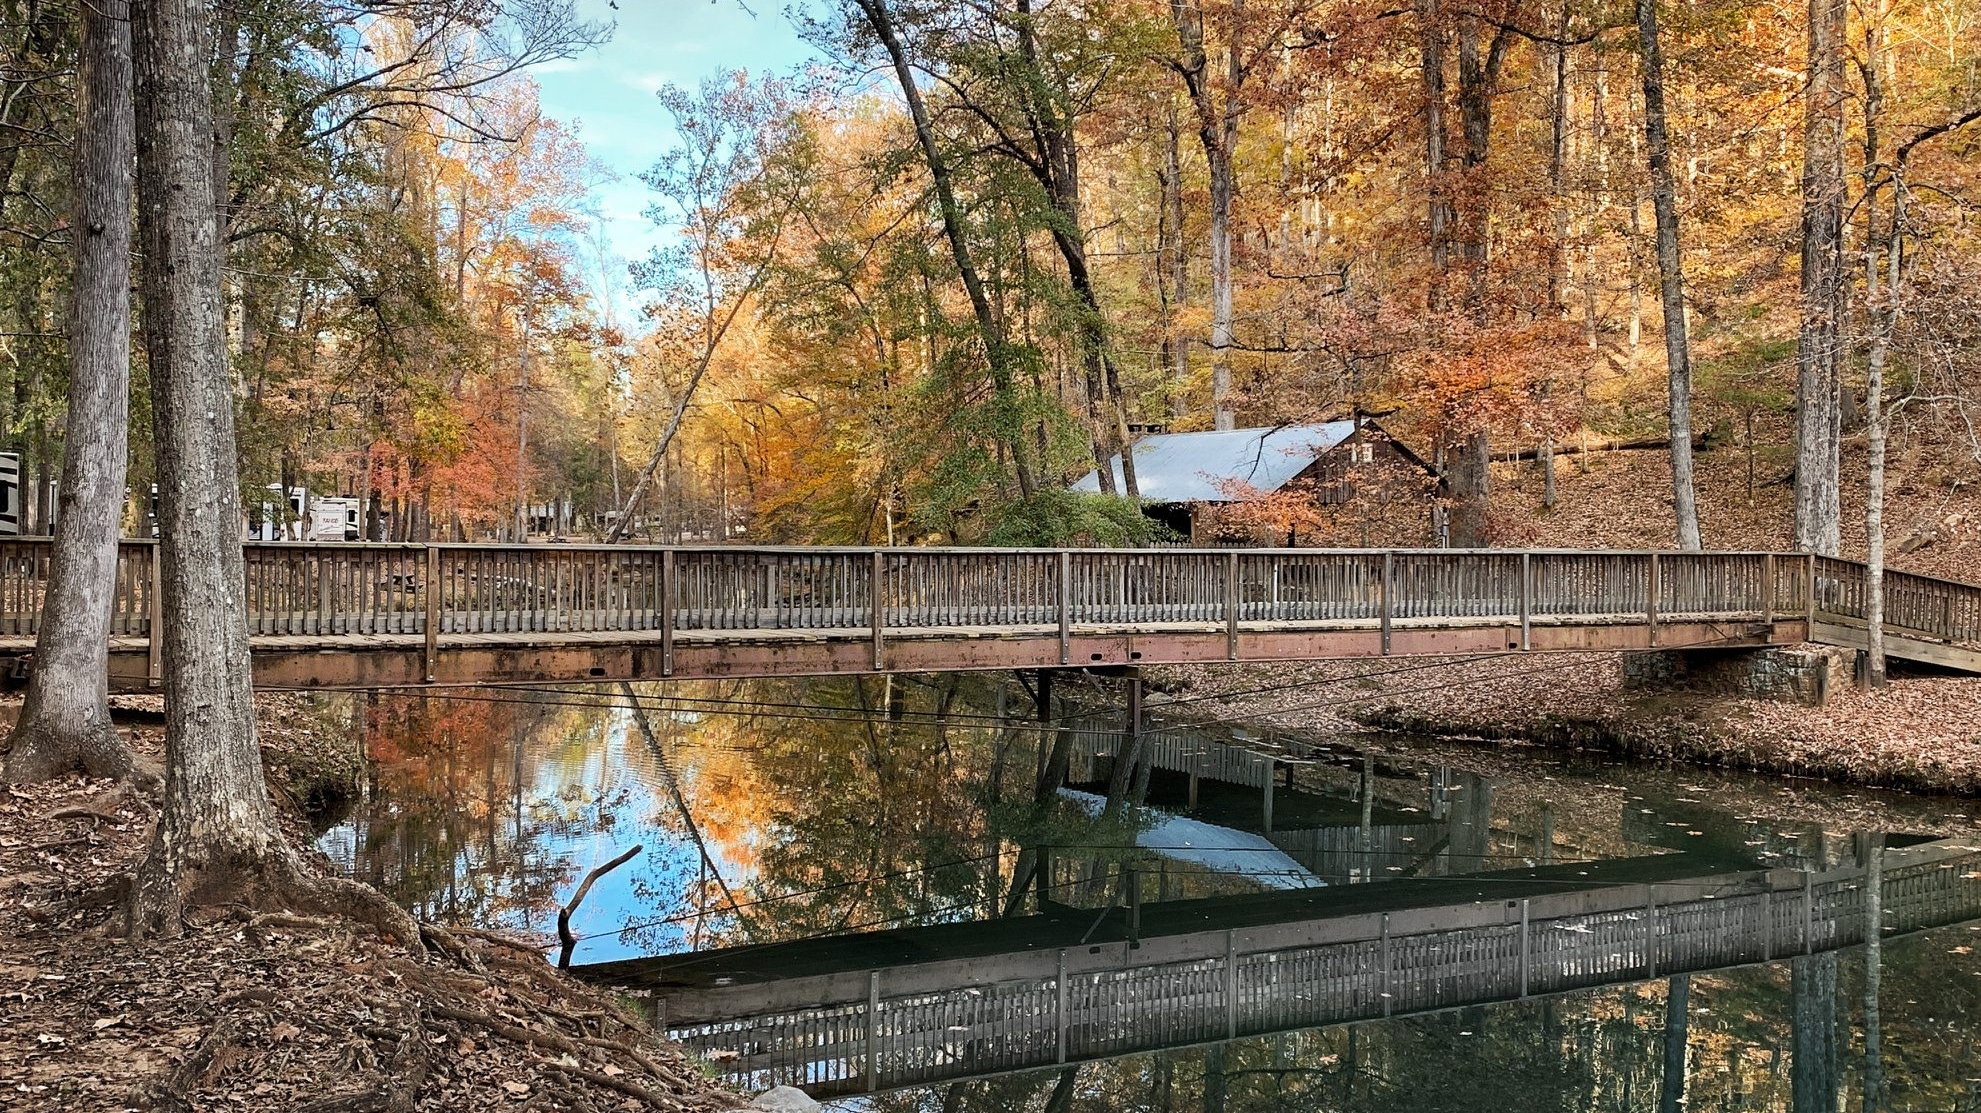 Picture of bridge over a lake with trees changing colors in the background